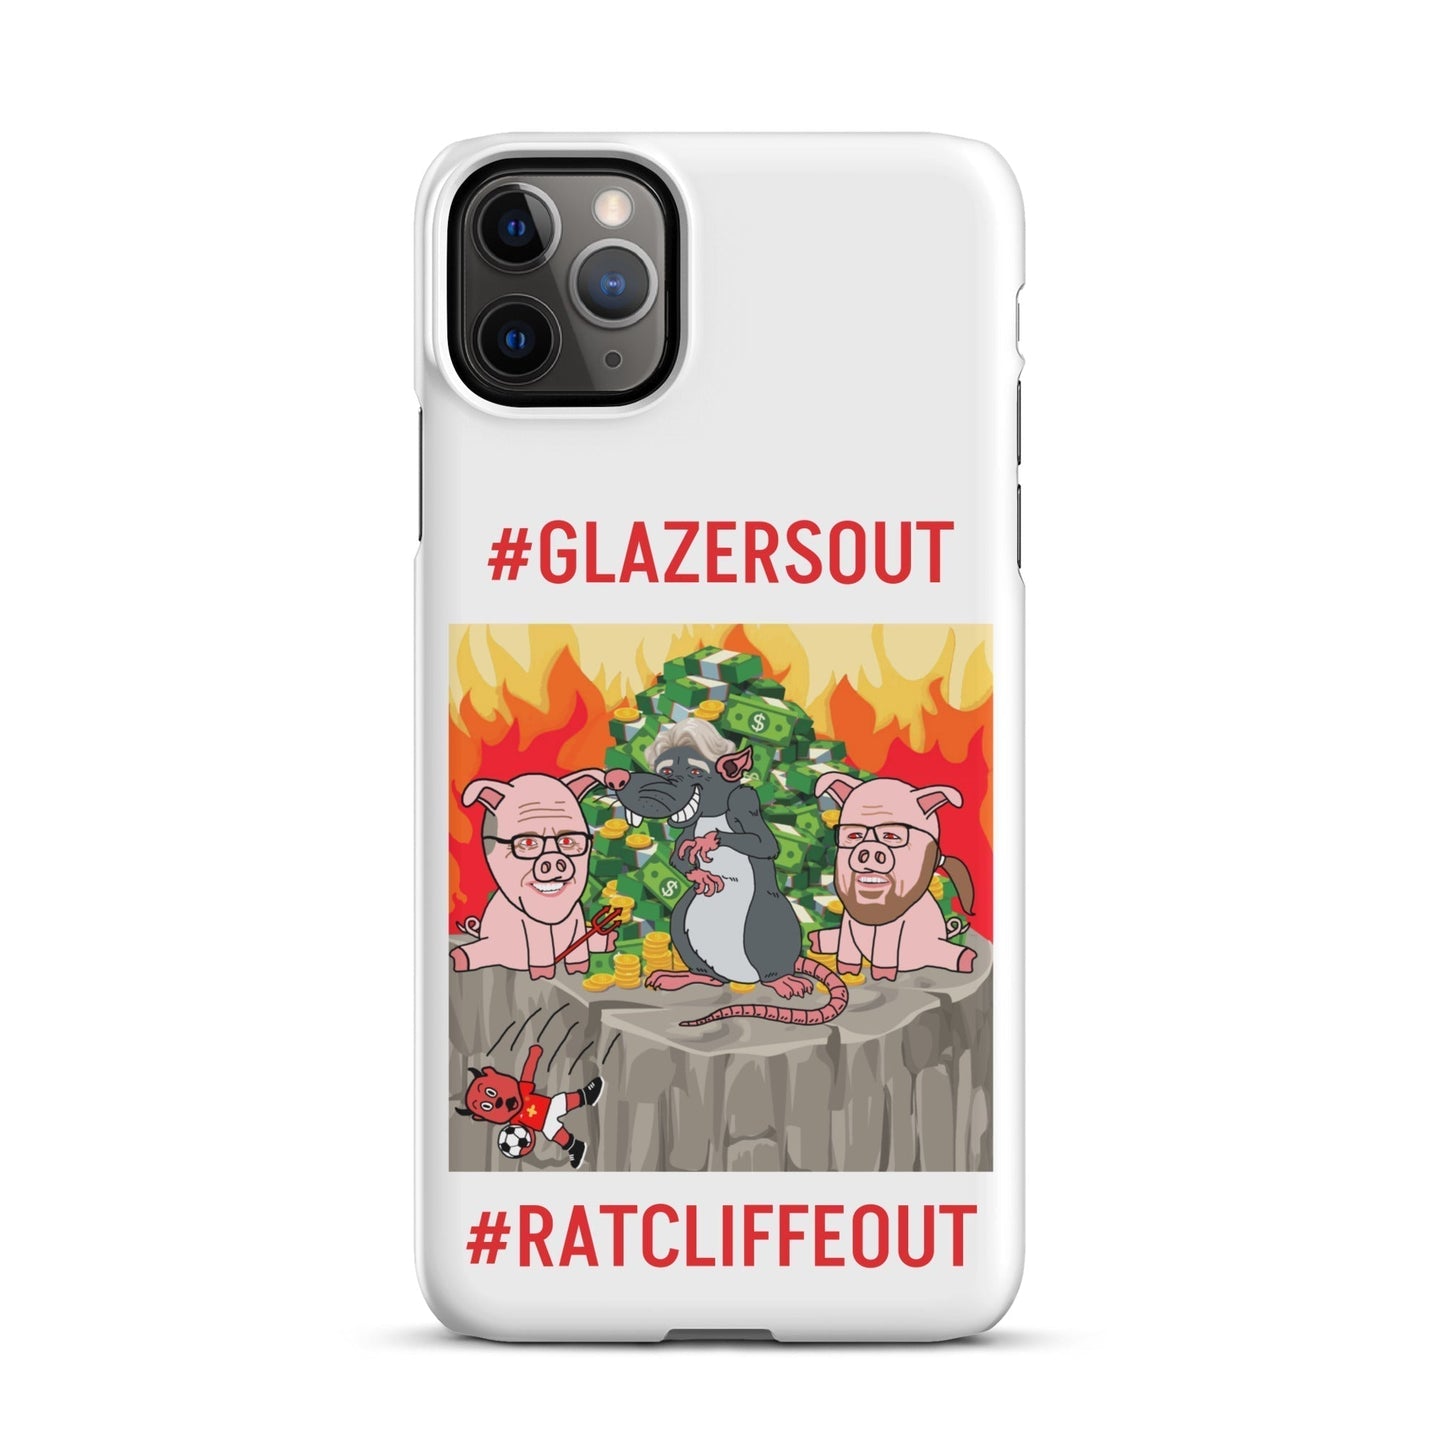 Manchester United Ratcliffe Out, Glazers Out Phone Snap case for iPhone® Next Cult Brand Football, GlazersOut, Manchester United, RatcliffeOut